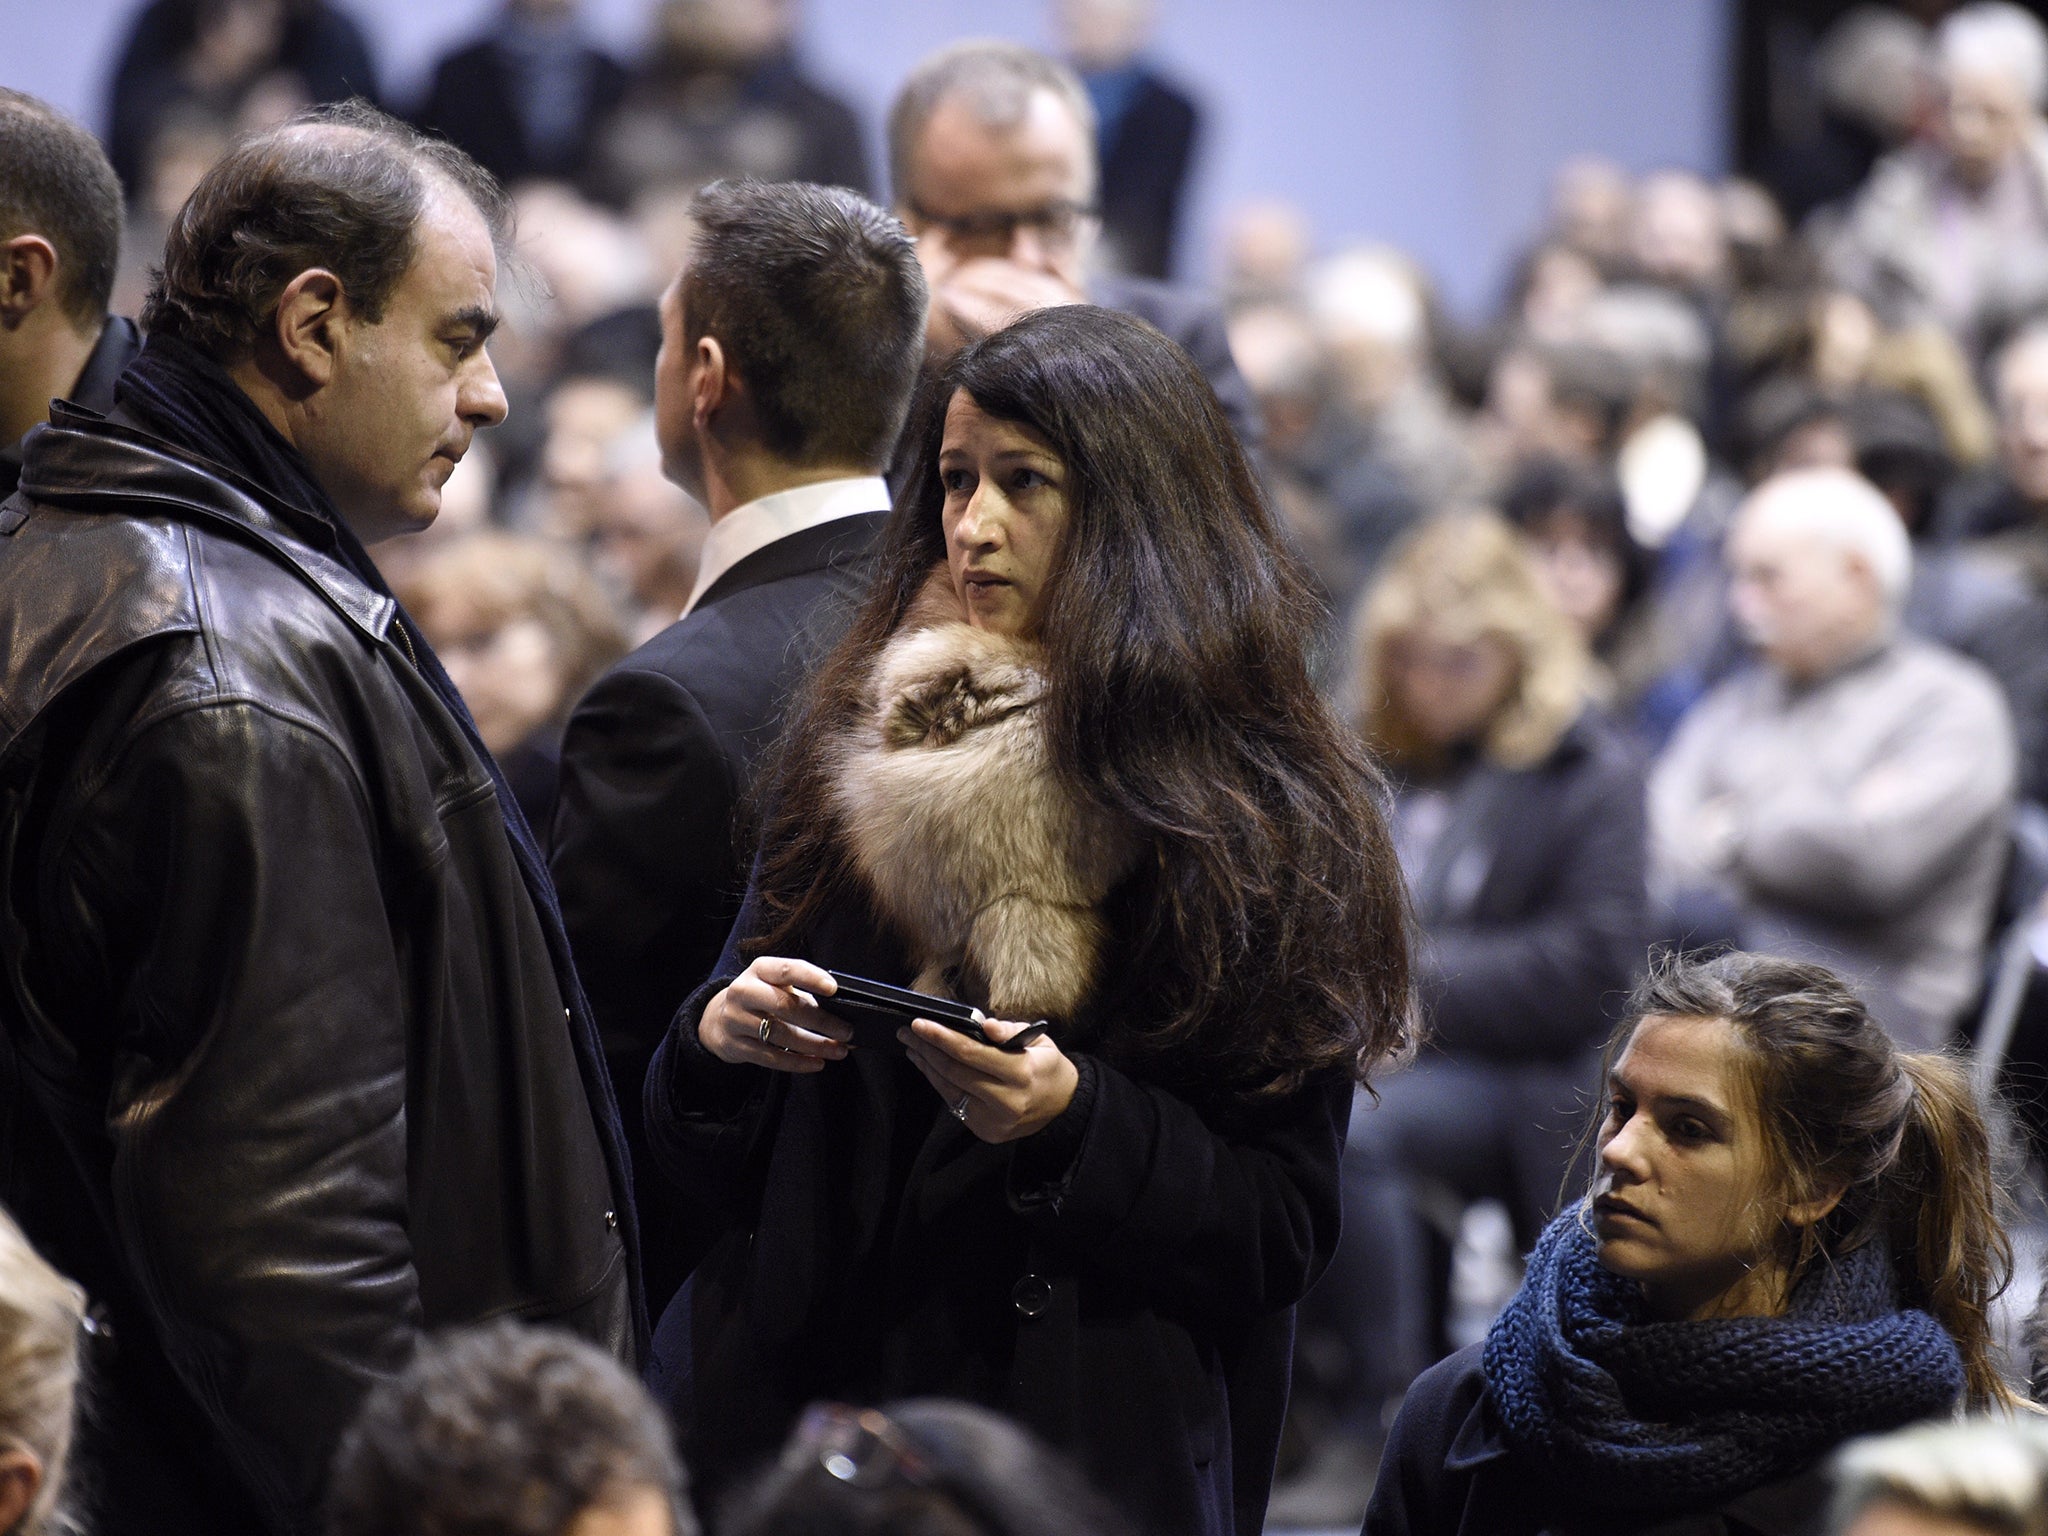 Charlie Hebdo's journalist Zineb El Rhazoui (C) attends the funeral ceremony of French cartoonist and Charlie Hebdo editor Stephane 'Charb' Charbonnier, on January 16, 2015 in Pontoise, outside Paris.